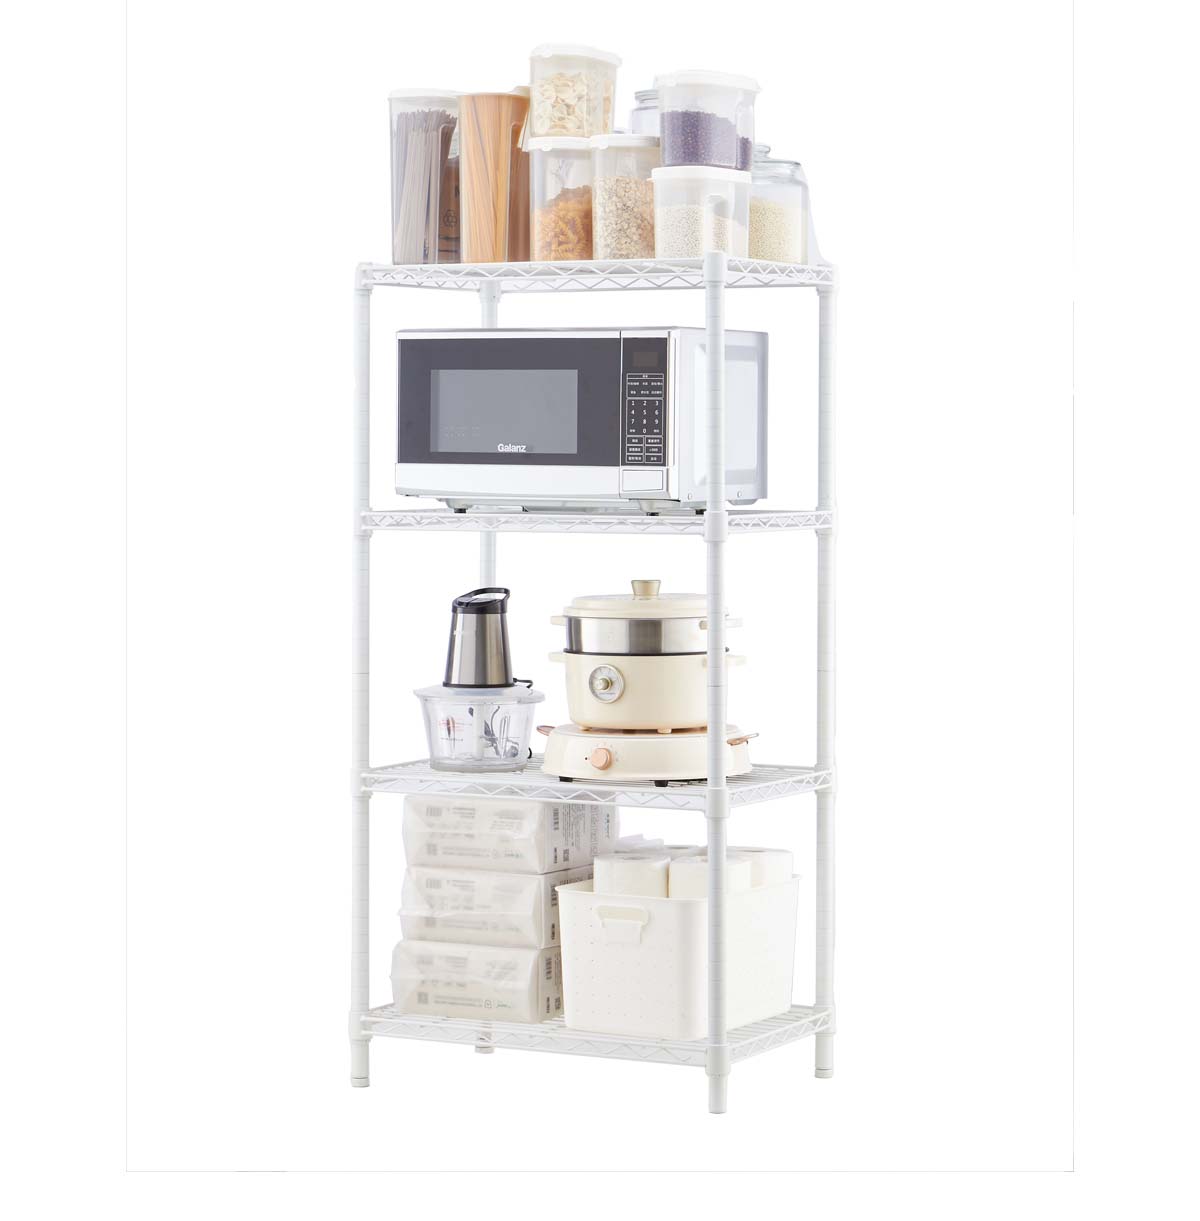 4-Tier Microwave With Storage / Wire Utility Shelving Unit / Wire Mesh Shelving Unit